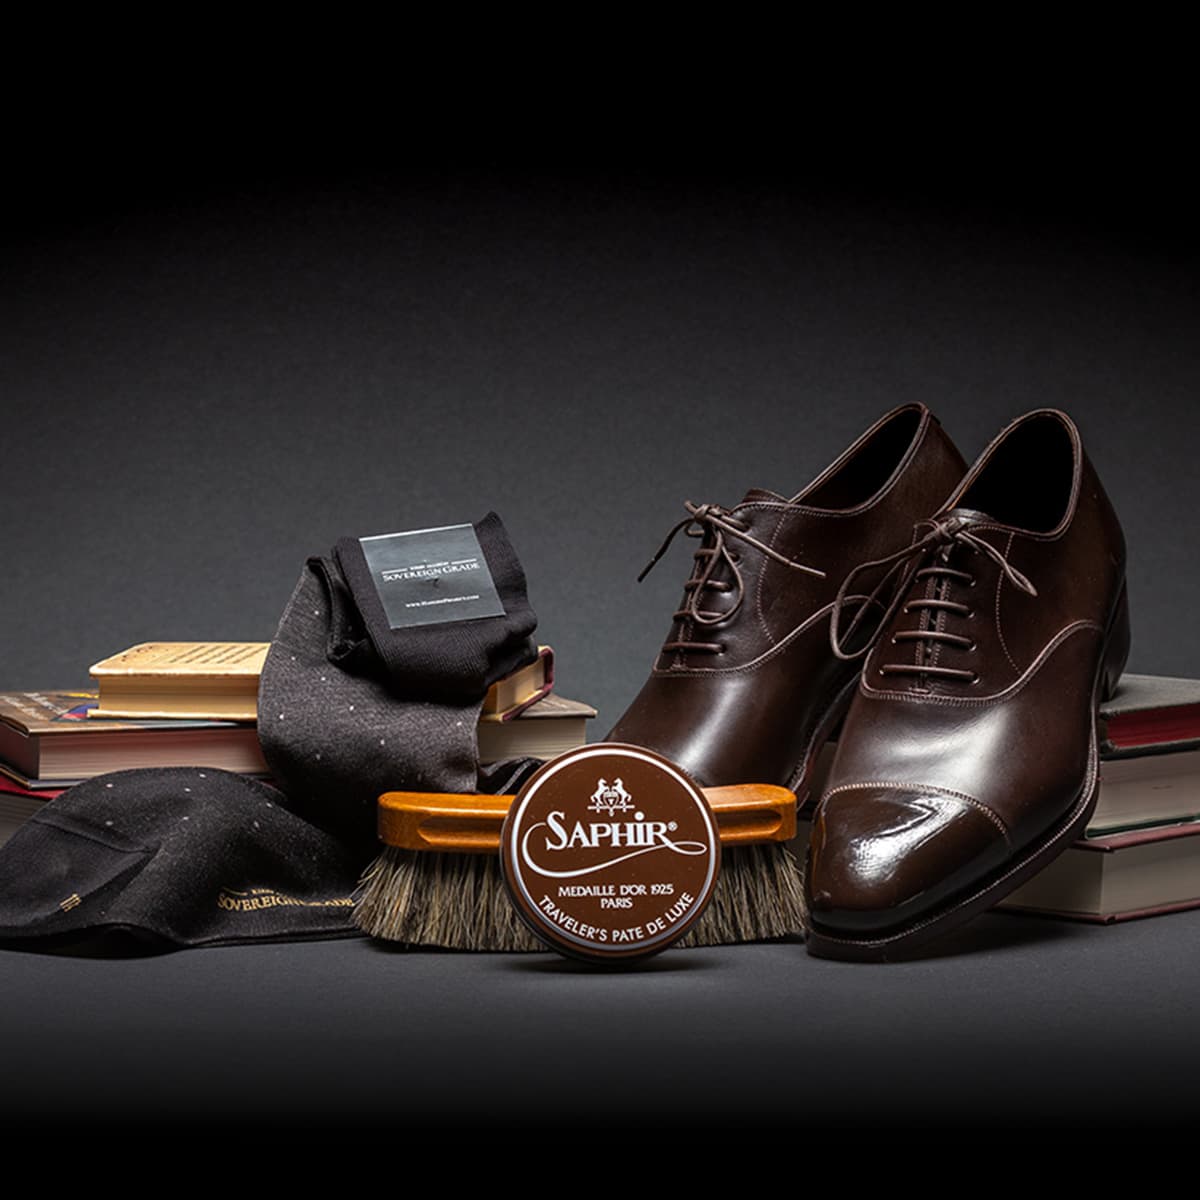 Image of a pair of brown dress shoes, a Saphir shoe polish can, black dress socks, and shoe polishing brush arranged over stacks of books. 